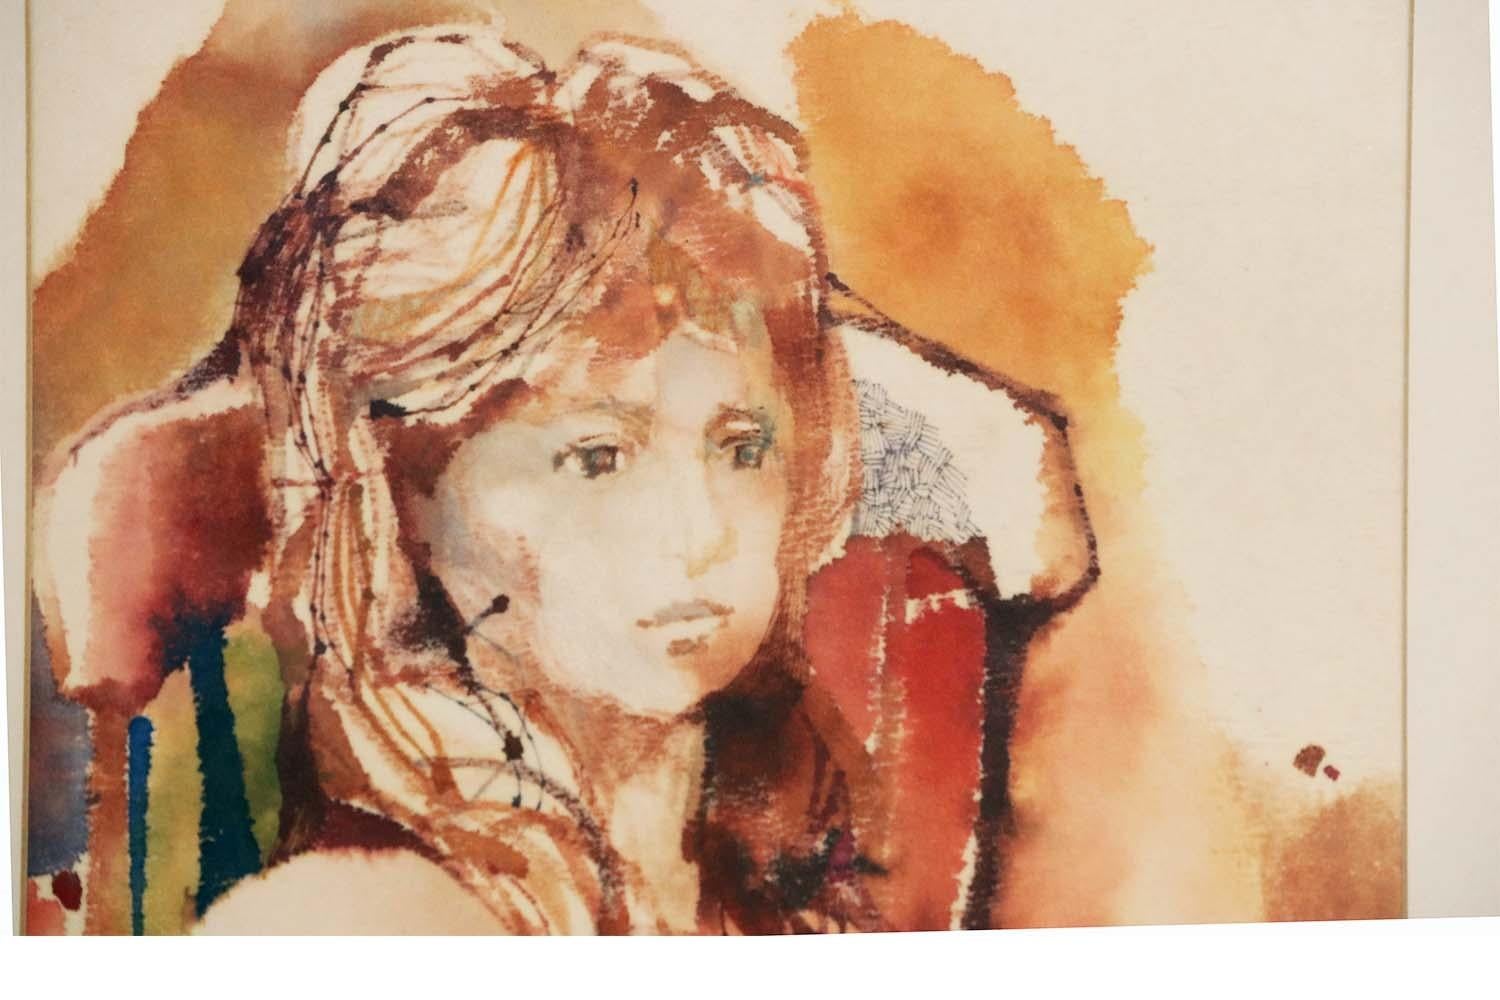 An original, gorgeous, watercolor Portrait of a girl by Listed Artist Myra Sides Copus, harmonious, beautiful, colors mixed with reds, yellows and pastels, creating an emotional dramatic painting. This original work of art is from the 20th century,